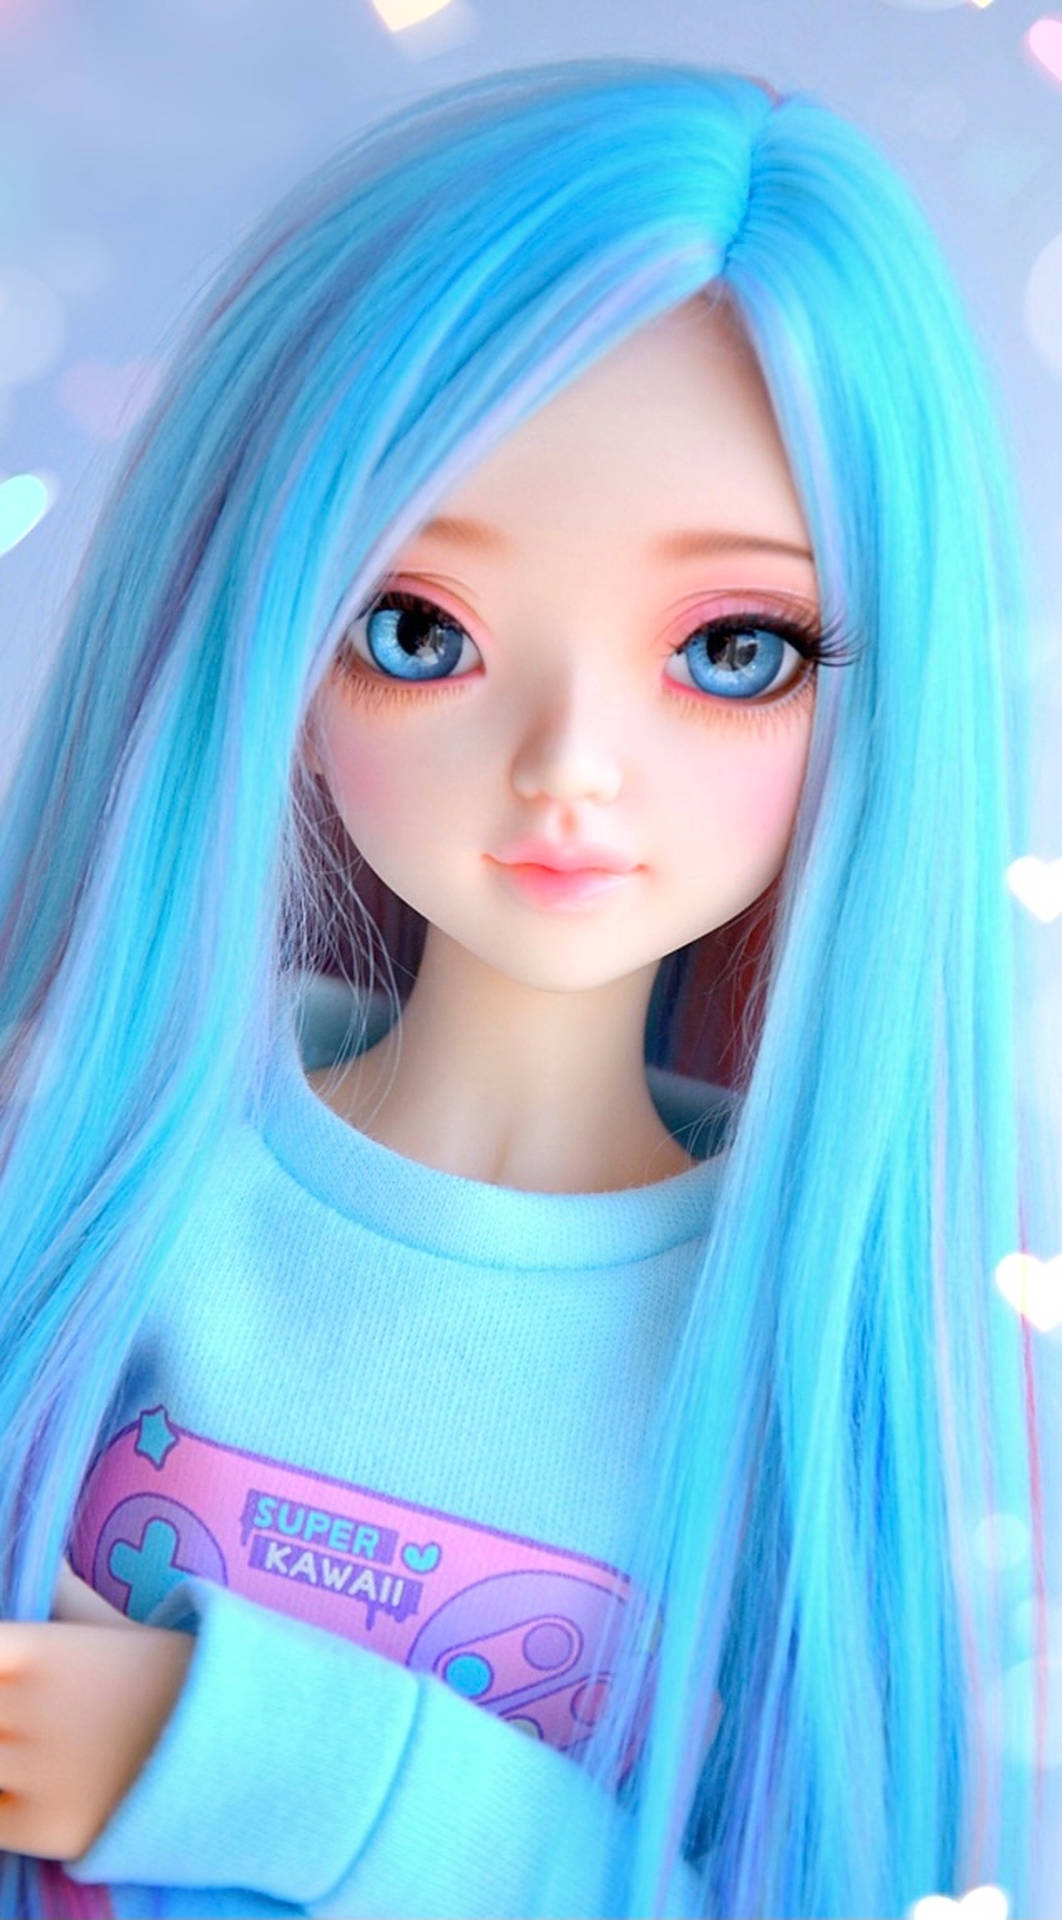 100 Doll Pictures  Download Free Images on Unsplash